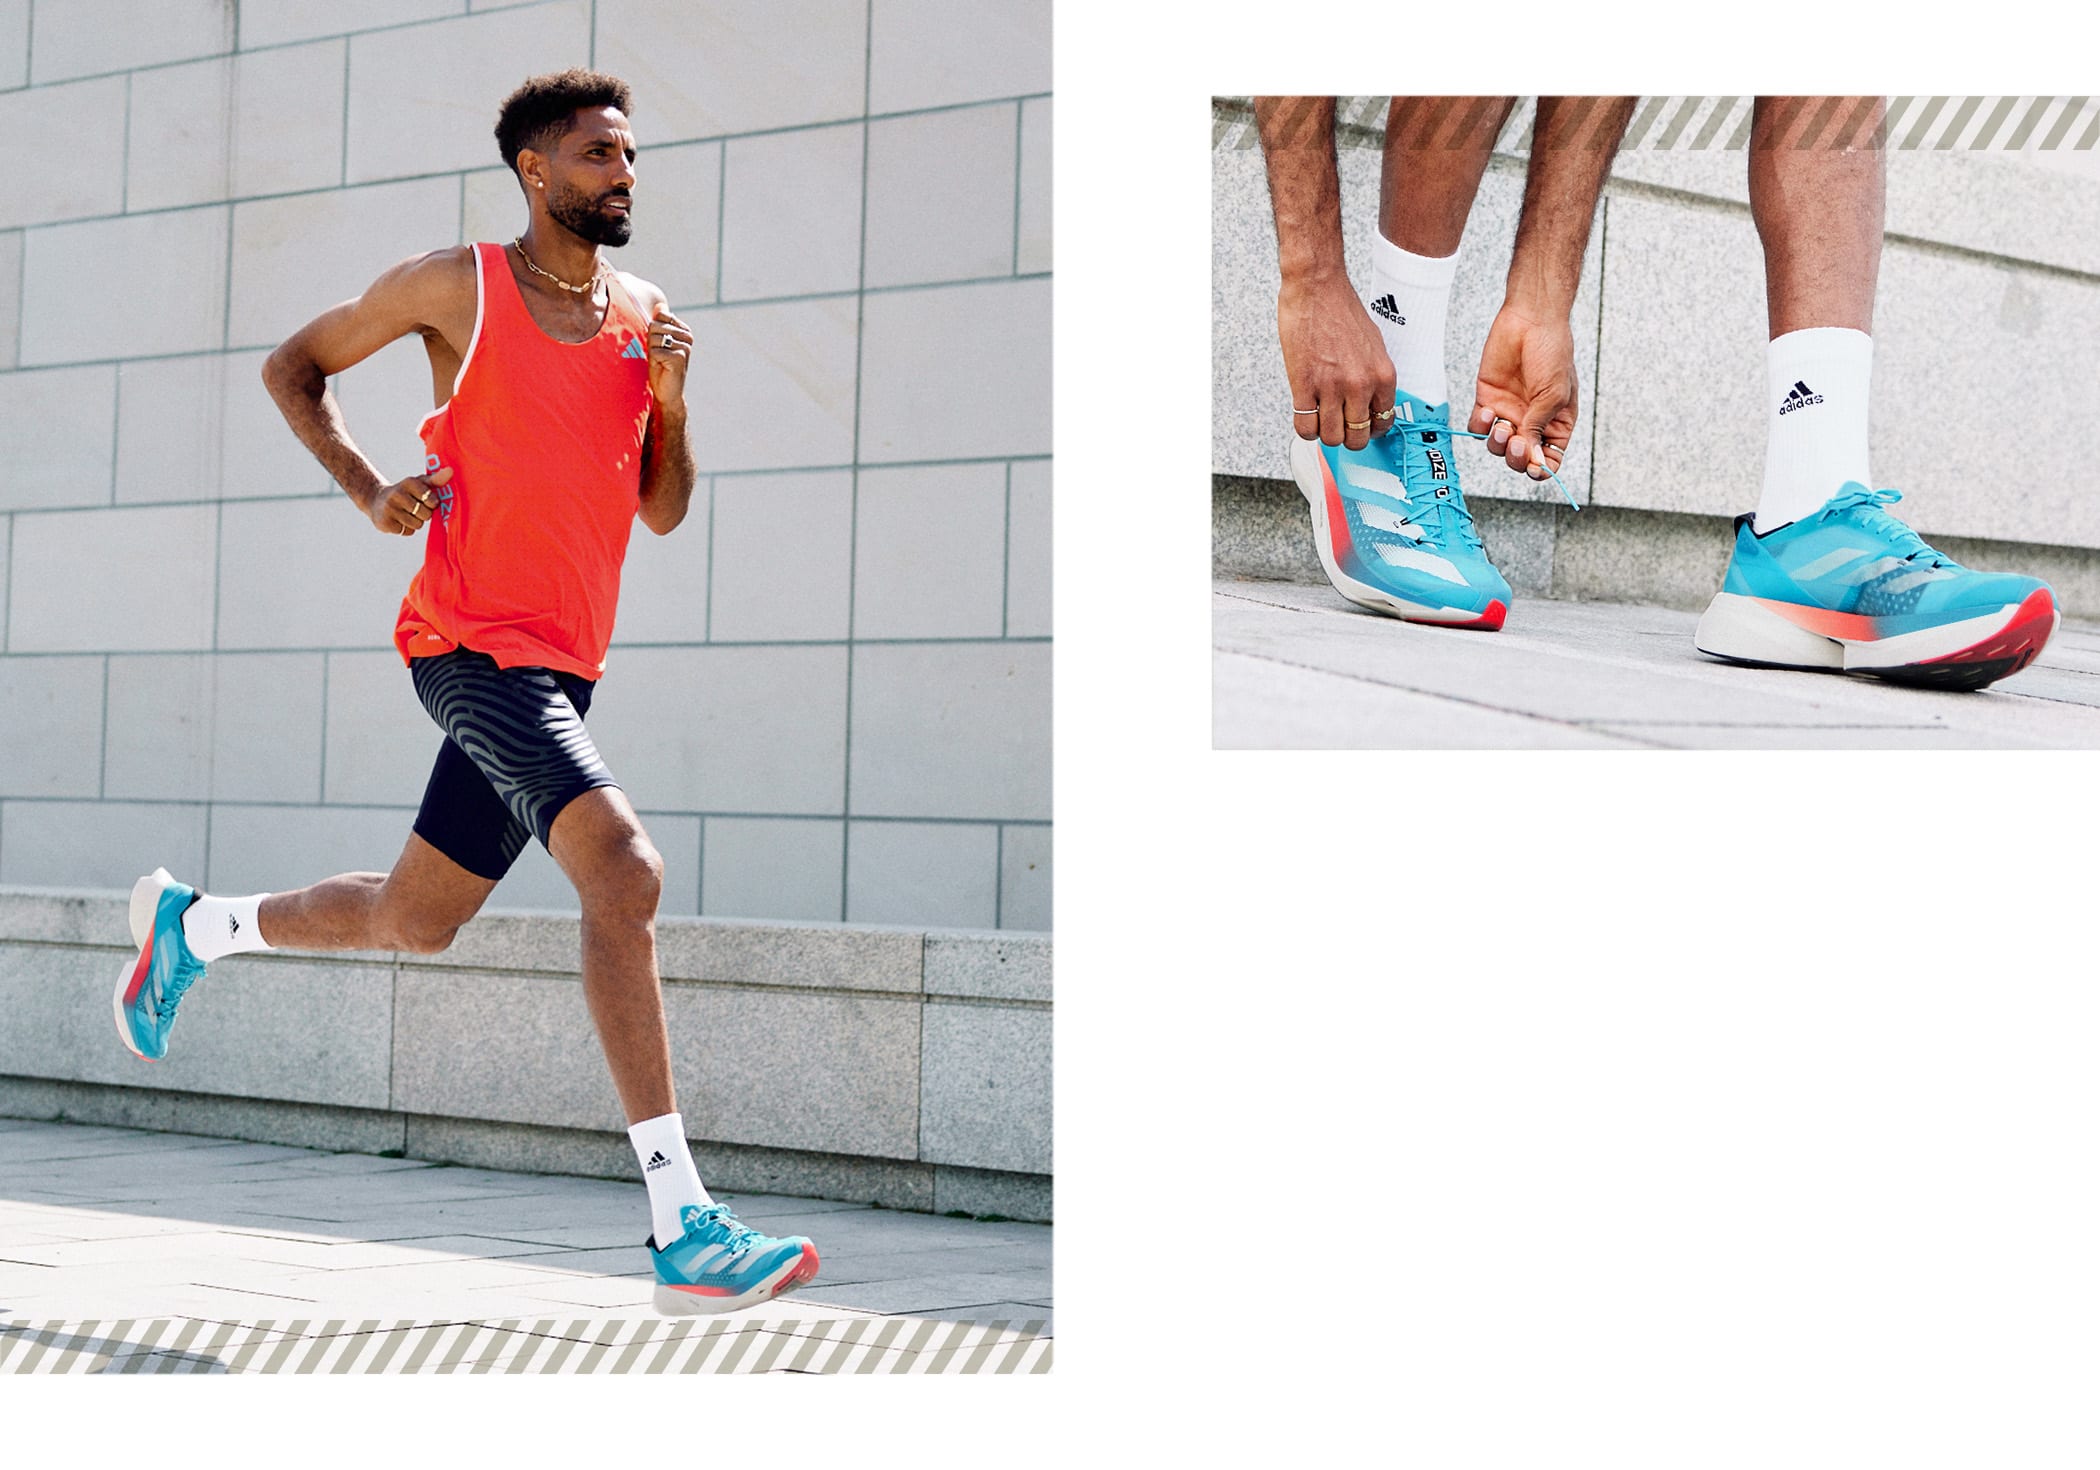 Image of a runner in action and an image of a shoe.